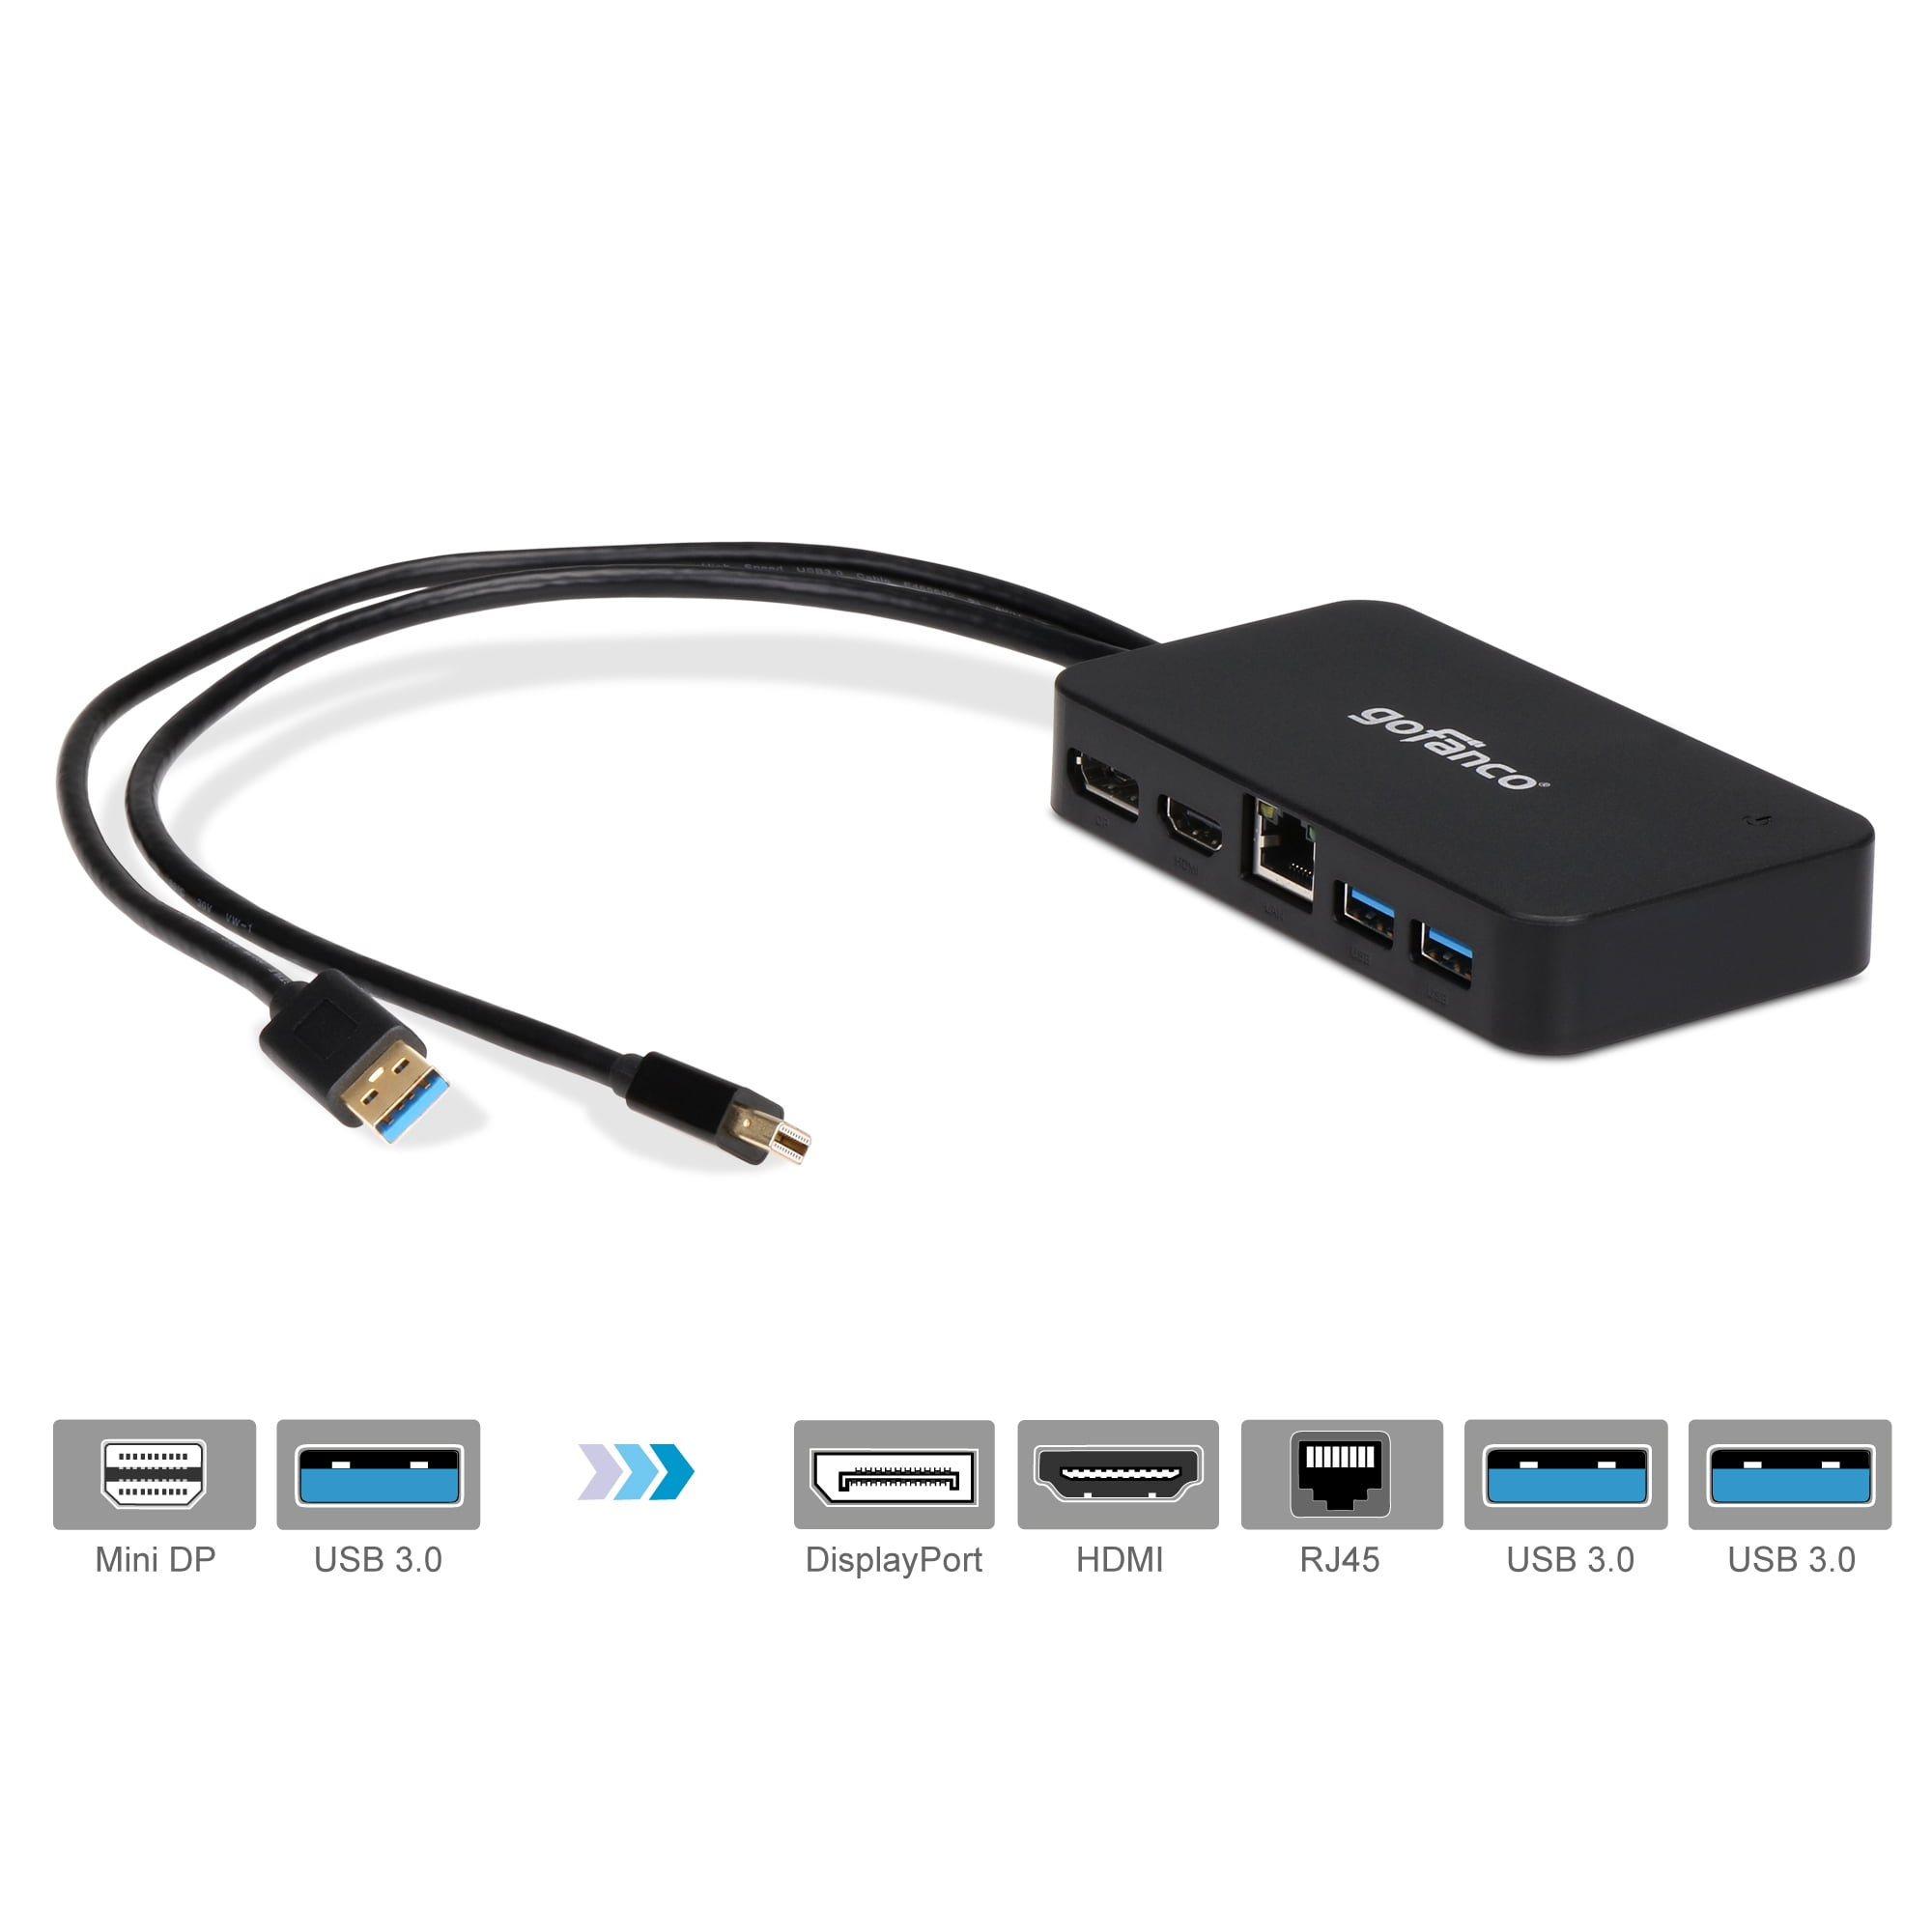 gofanco Mini DisplayPort(Thunderbolt 2) Video Dock/Docking Station with HDMI, DisplayPort, USB 3.0 and Gigabit Output for Surface Pro, MacBook and PC - Thunderbolt 2 to DP or HDMI Adapter Hub -